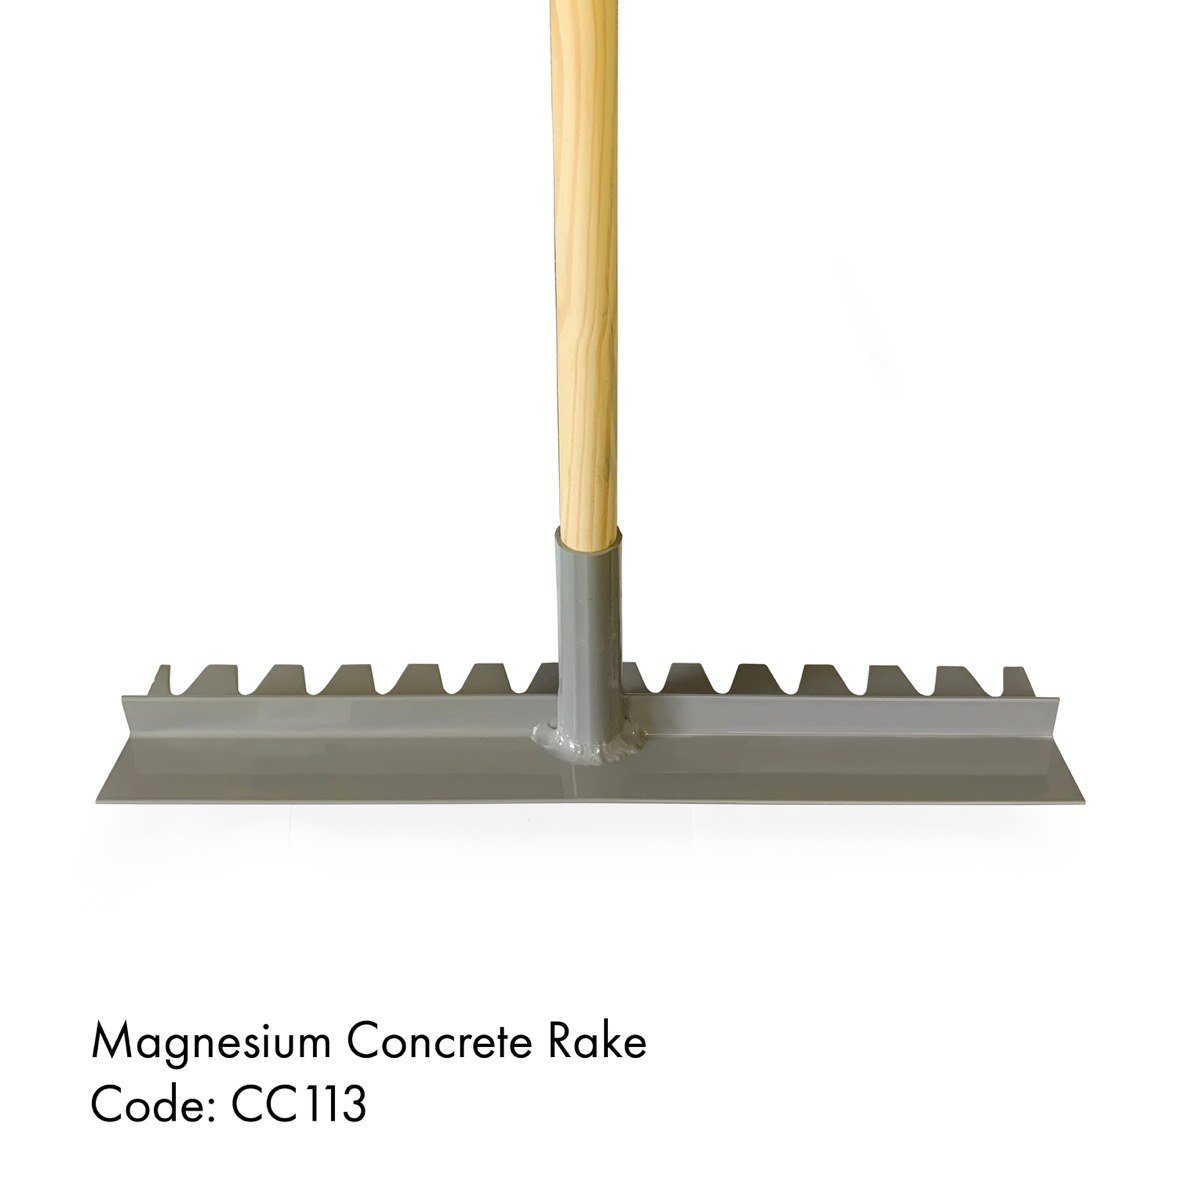 Magnesium dual edged concrete rakes are available from construction tool supplier Speedcrete. These rakes are made from magnesium and are fixed to a robust wooden handle.